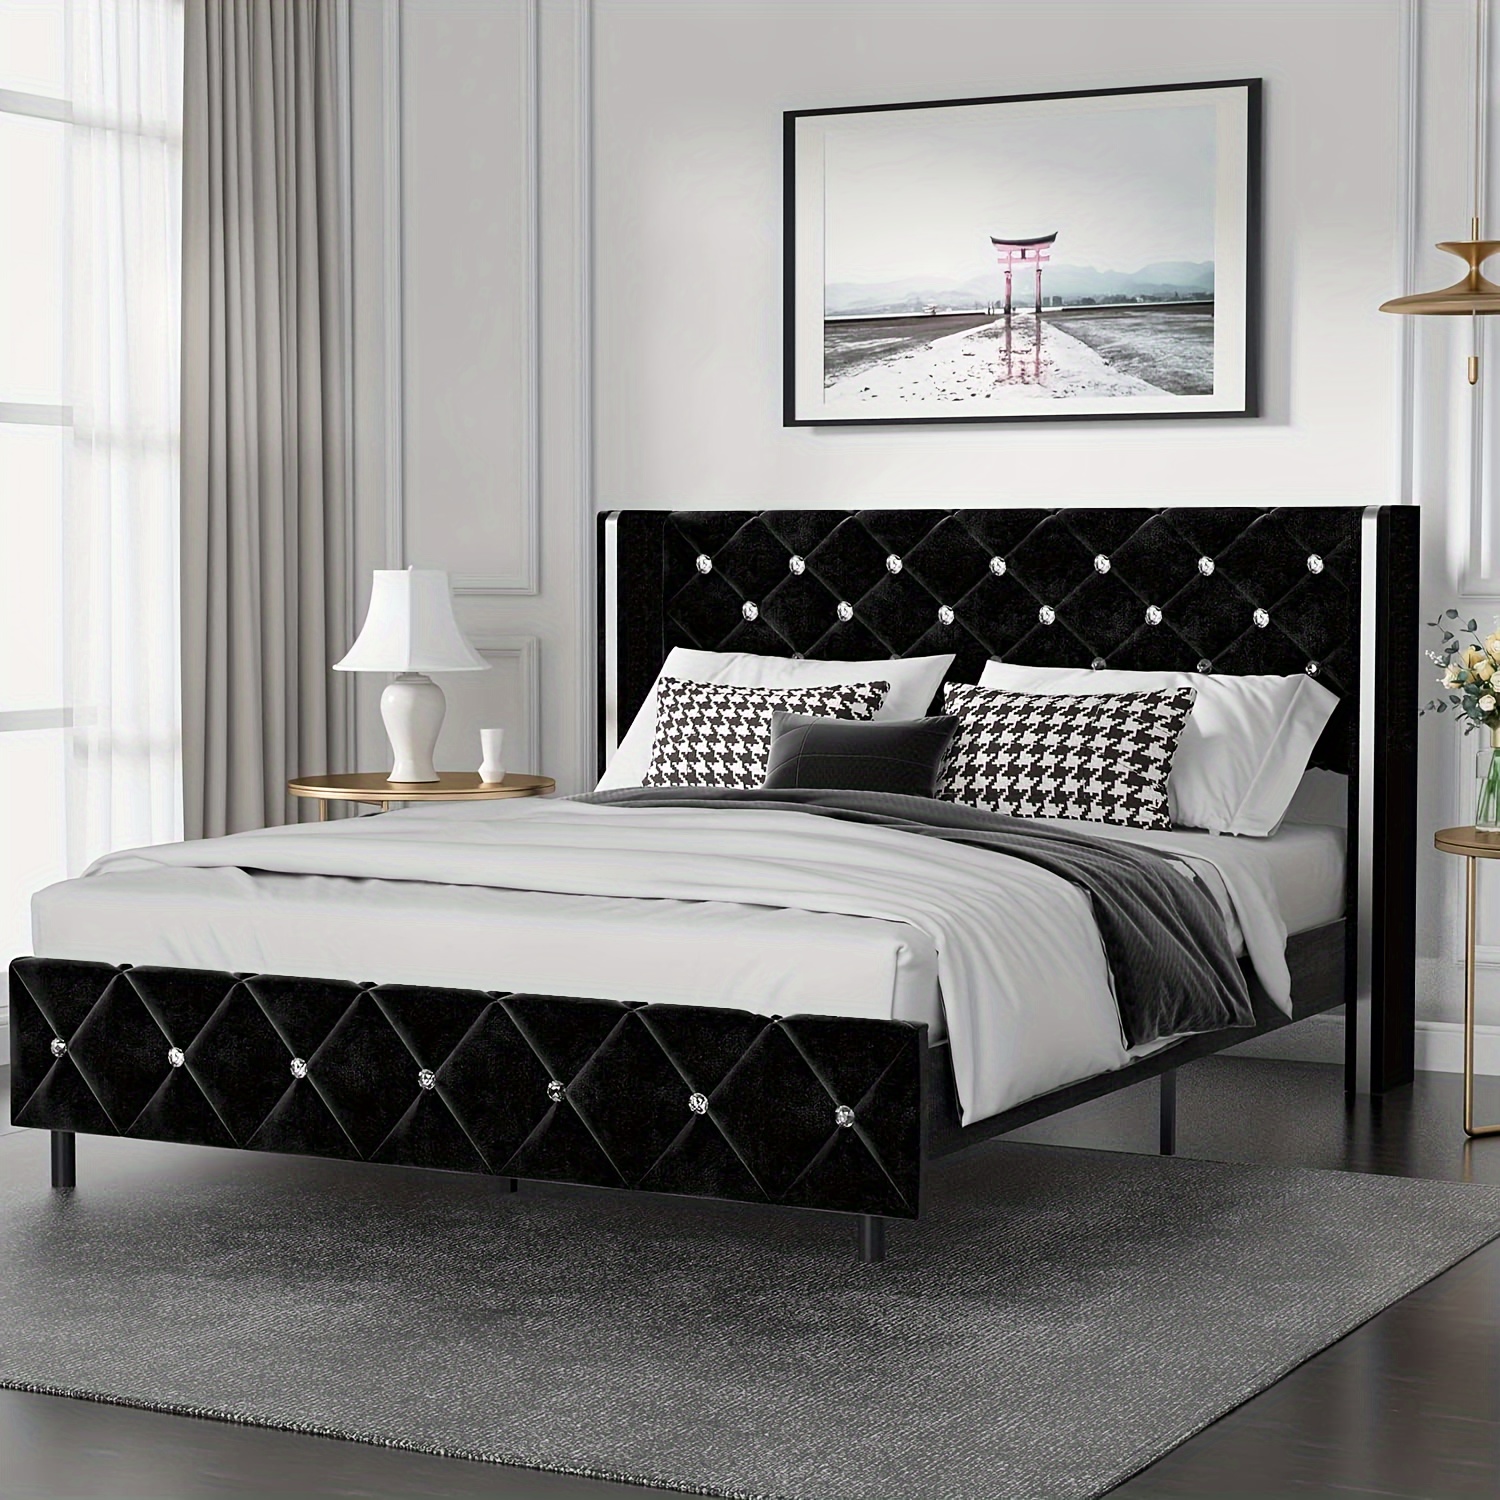 

Velvet Upholstered Bed With Diamond Headboard, Black Bed Frame Full With Wingback Headboard & Footboard, No Box Spring Needed, Easy Assembly/black